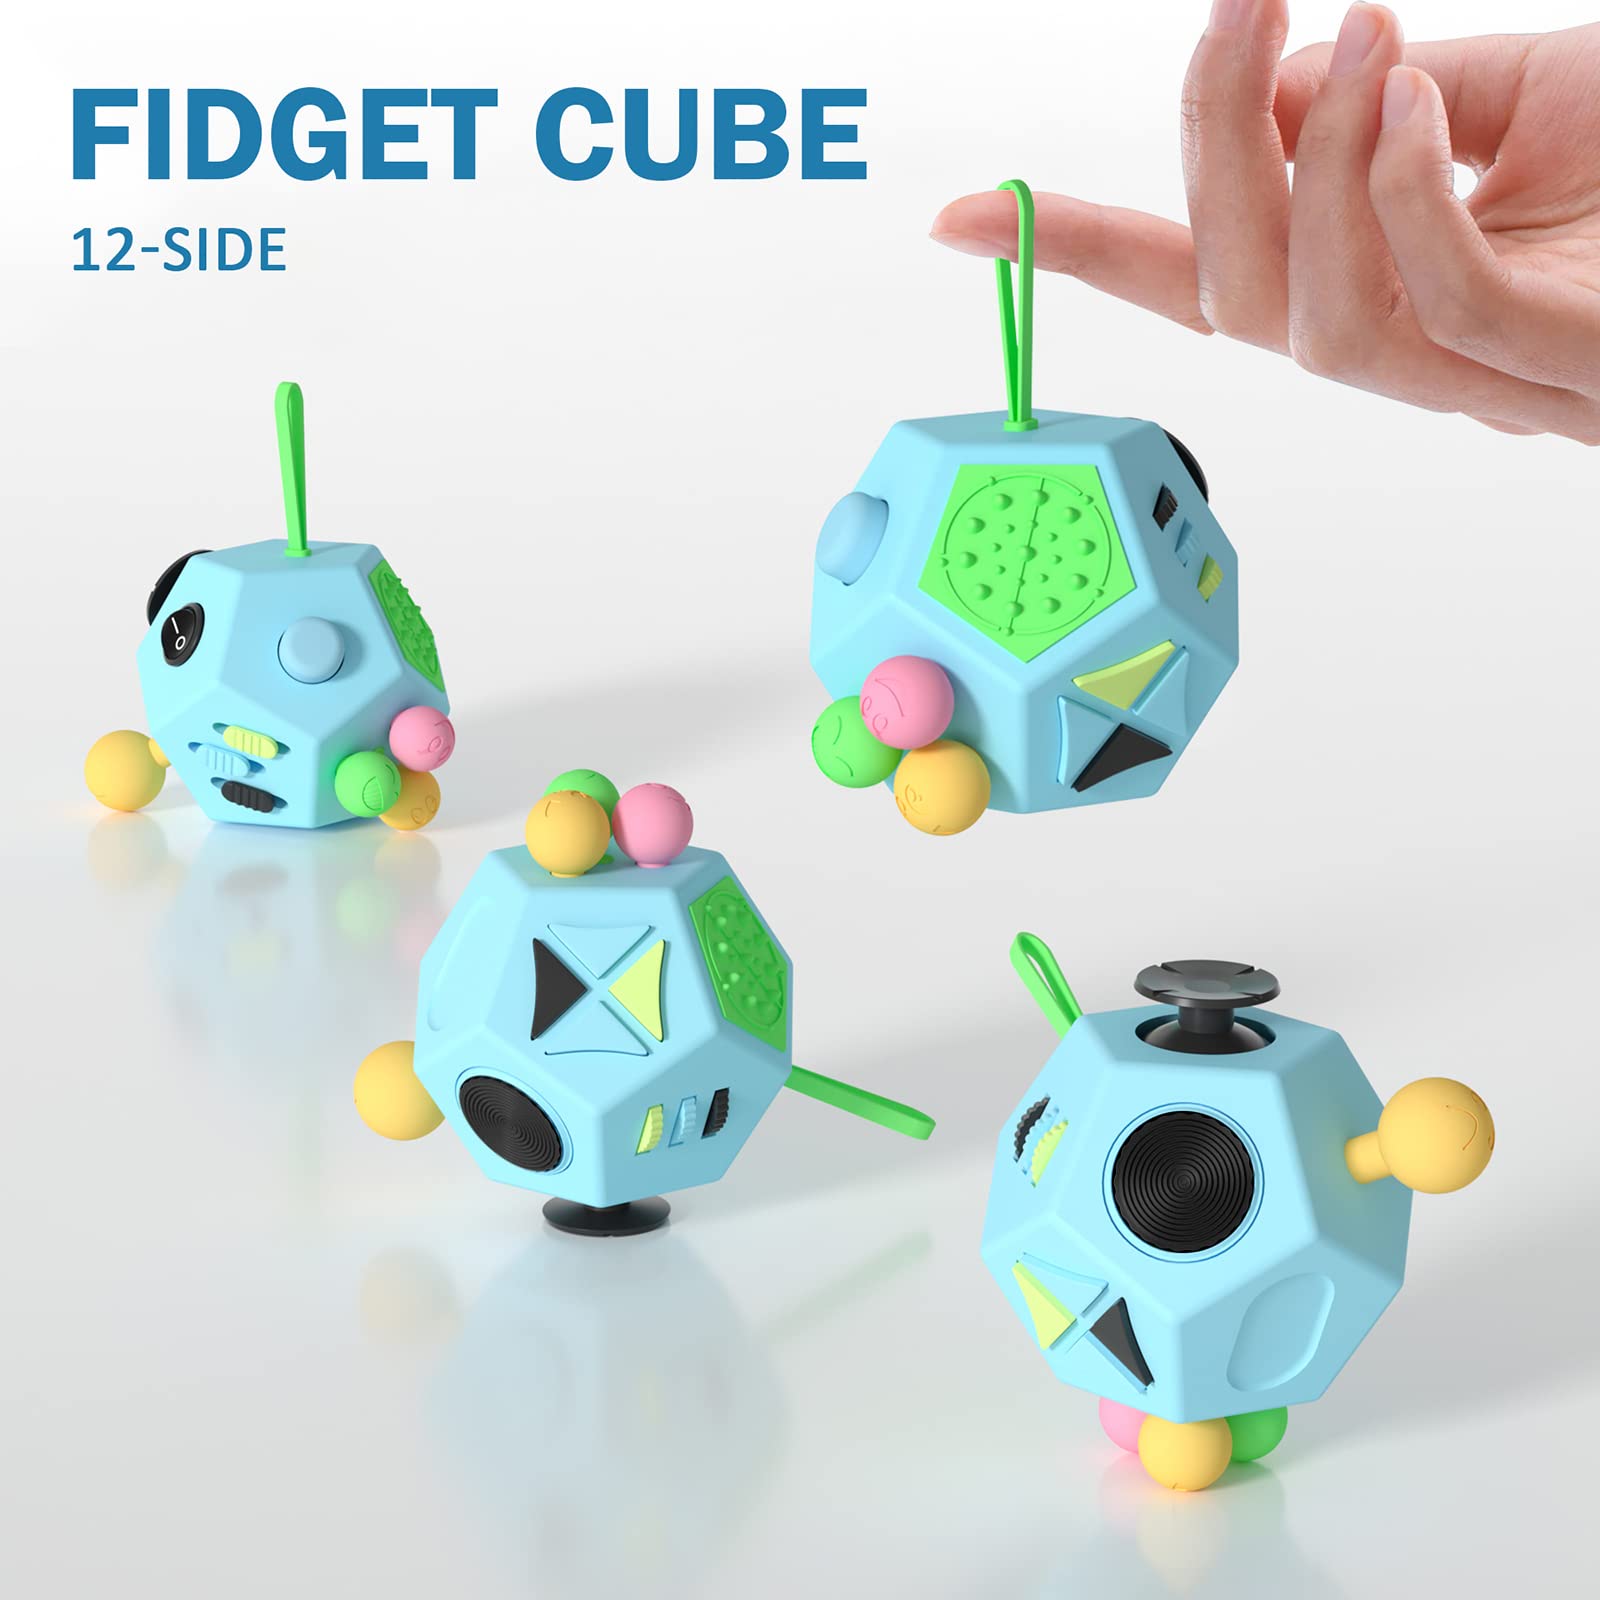 Fidget Dodecagon –12-Side Fidget Cube Relieves Stress and Anxiety Anti Depression Cube for Children and Adults with ADHD ADD OCD Autism (B3 Blue Sky)